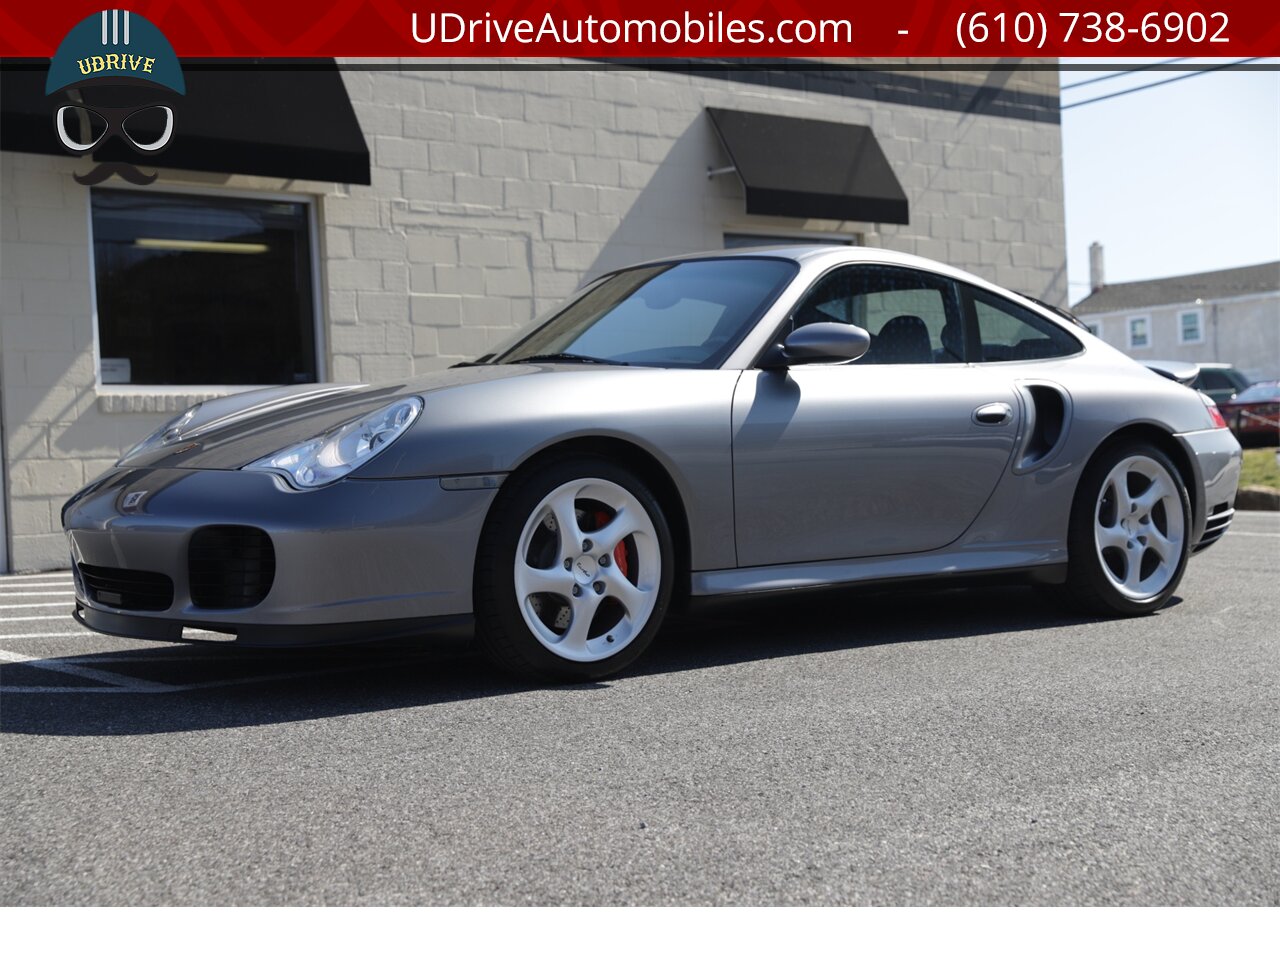 2003 Porsche 911 996 Turbo X50 Power Kit 6 Speed Seal Grey  over Black Leather - Photo 10 - West Chester, PA 19382